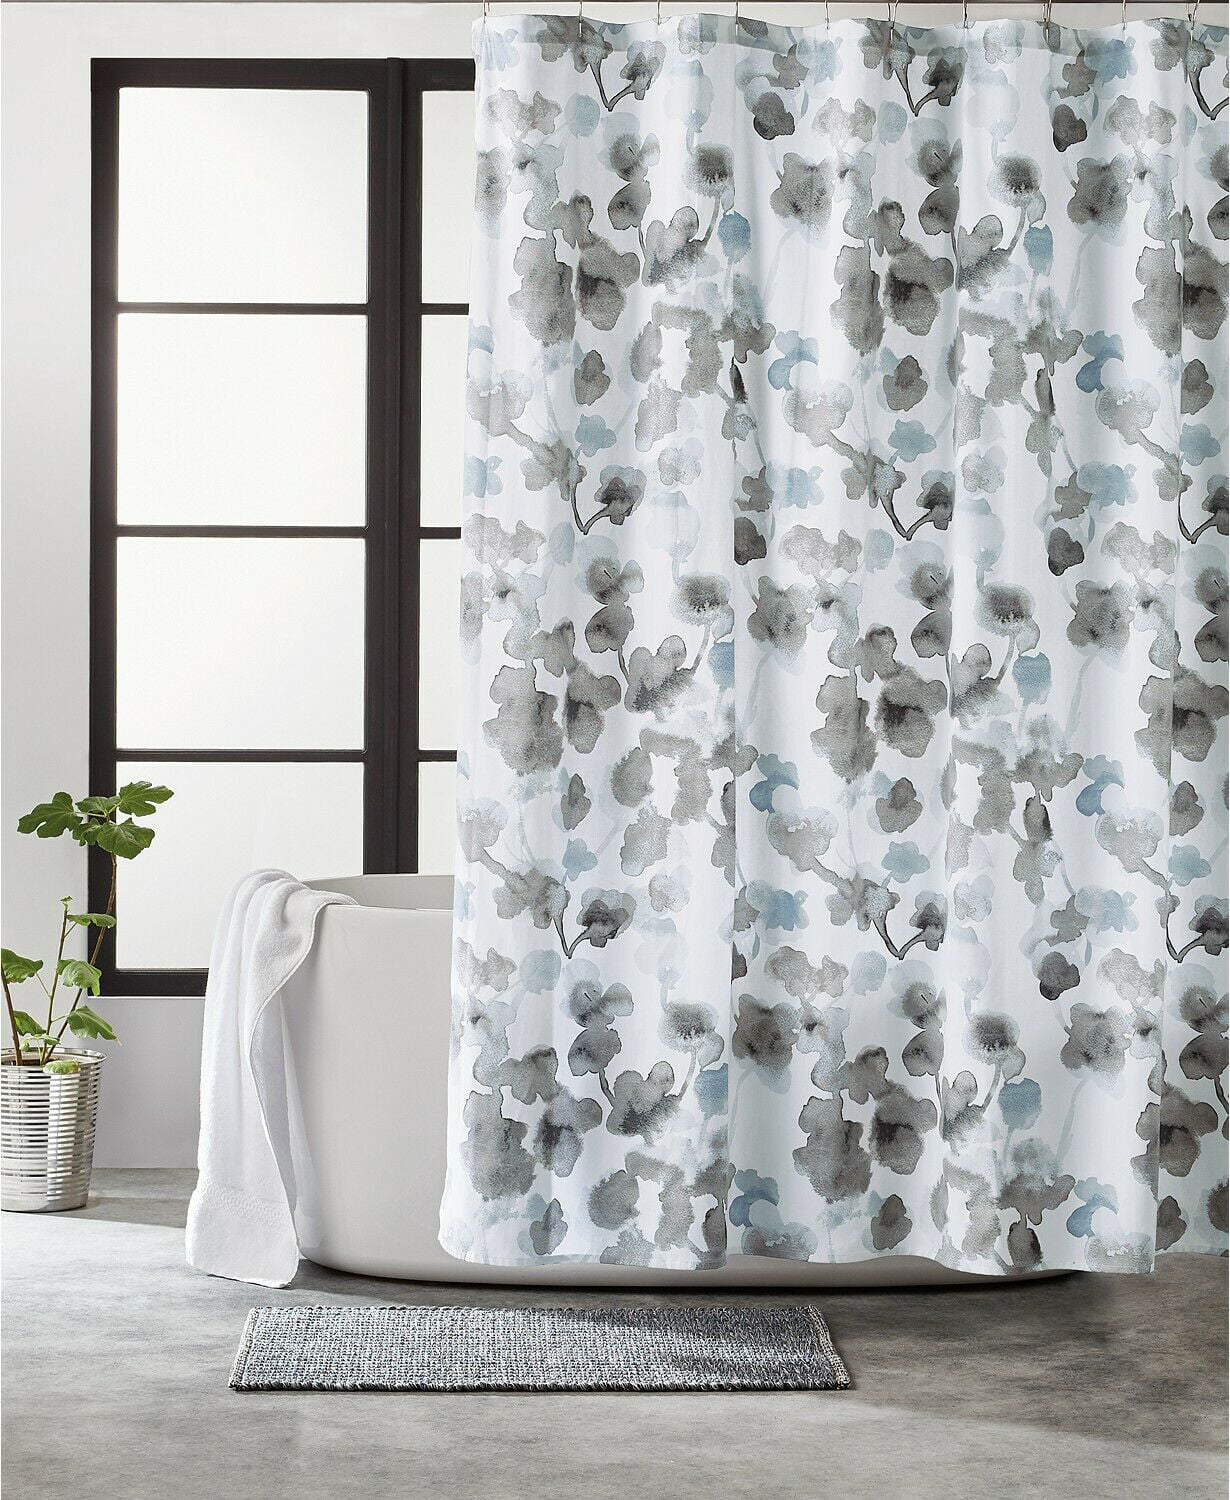 Details about   Dkny Watercolor Lefferts Microsculpt  Floral Fabric Shower Curtain Blue Yellow 